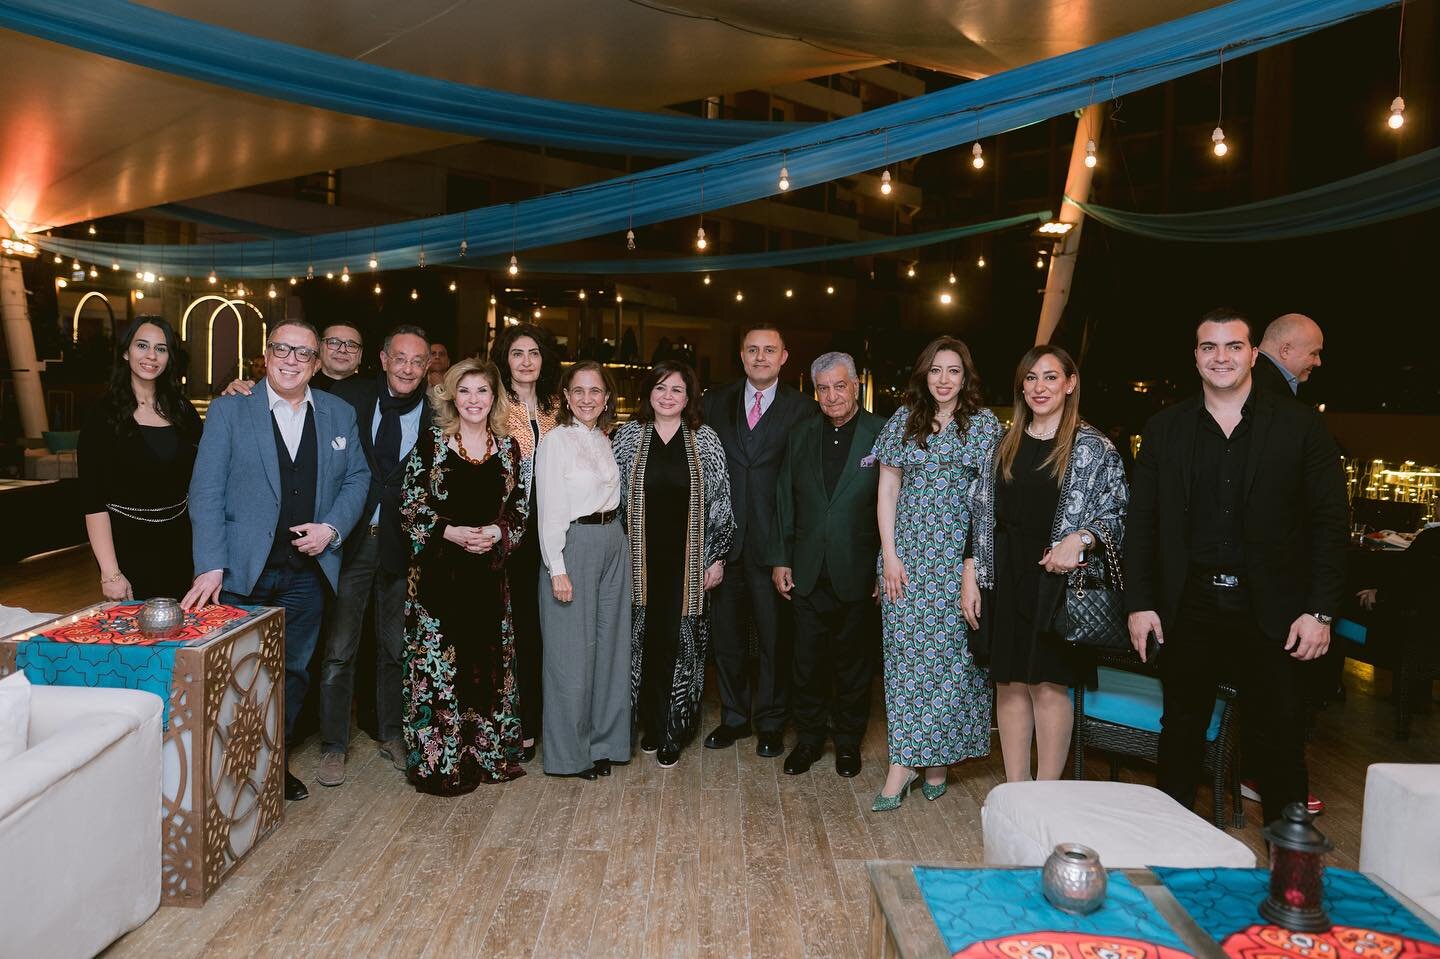 On the 27th of March I was invited to an Iftar by the director of Semiramis Intercontinental Sameh Sobhy and Sara Director of the Public Relations. 

They invited many great society celebrities such as the famous Elham Shaheen, Nelly Karim, Hala Sarh